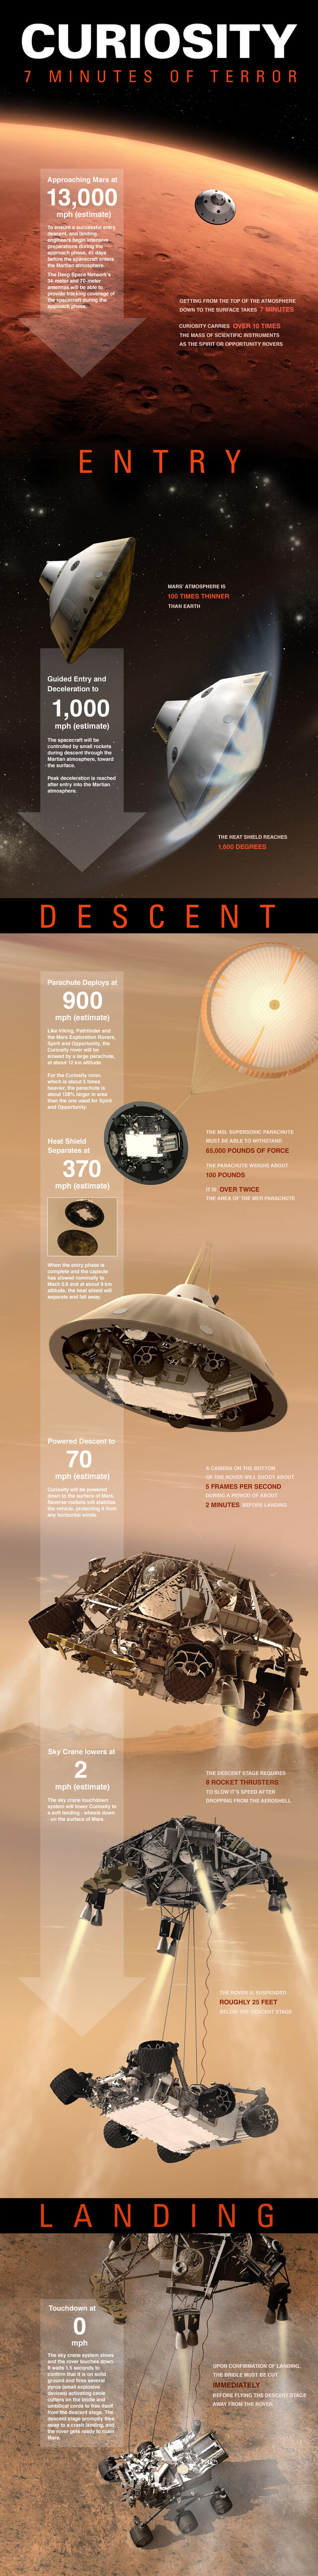 Seven minutes of horror, the process of landing Curiosity on Mars step by step. Image: NASA